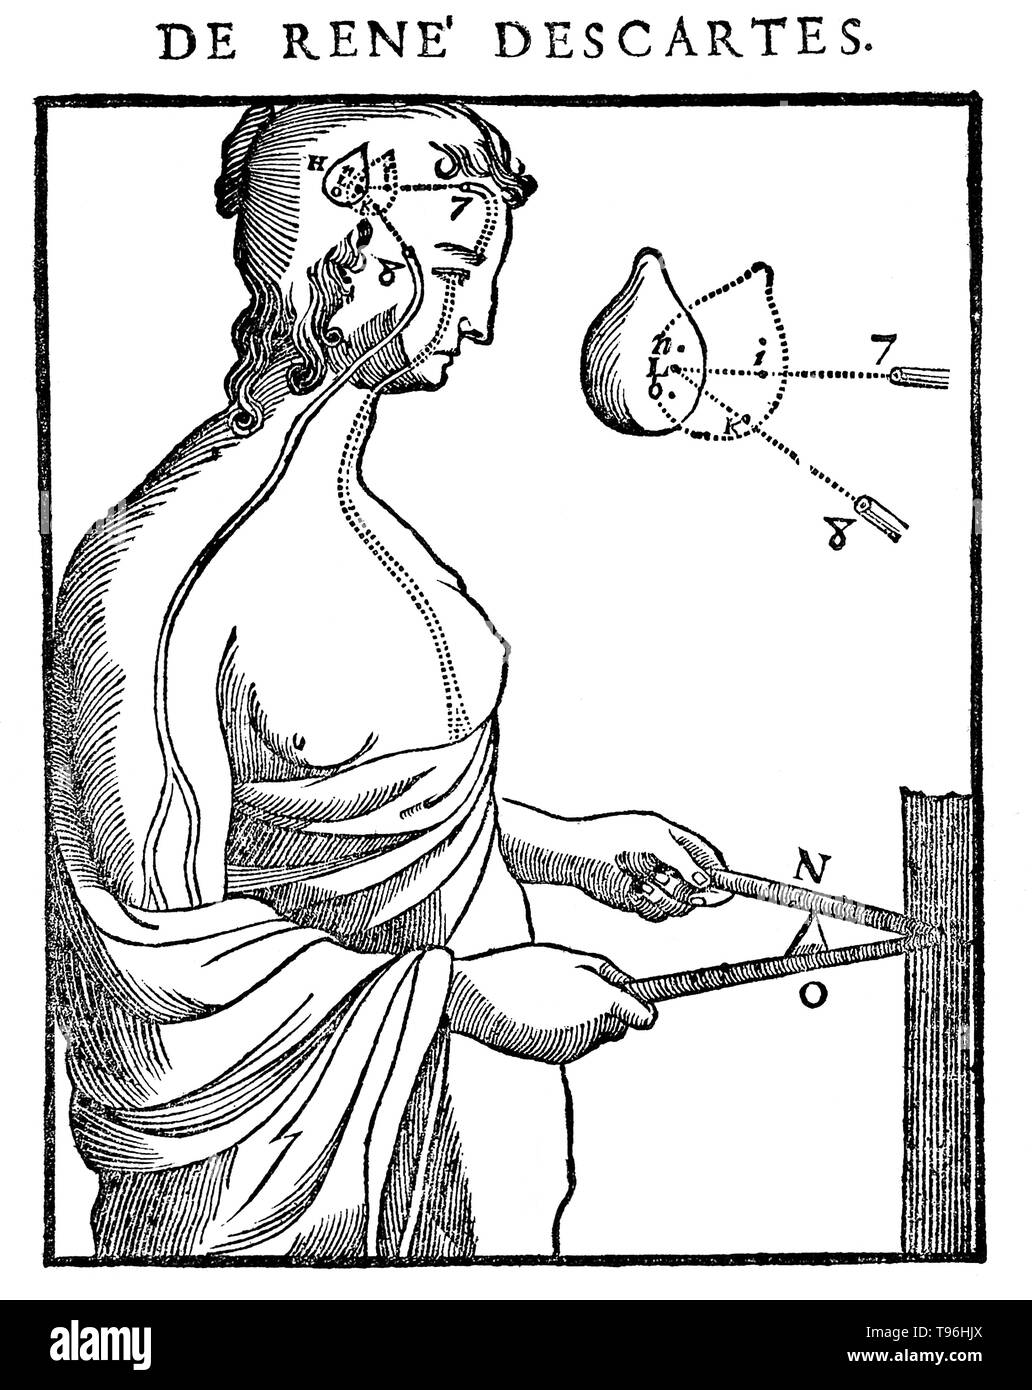 Perception of distance between objects. Relationship between the sensory perception of an image and muscular action. Descartes originally planned to publish De homine (L'homme et un traitte, Treatise of Man)  in 1633, but hearing of Galileo’s condemnation by the Church, he became concerned for his own safety and refused to have it printed. The first edition of this work appeared 12 years after his death. Stock Photo